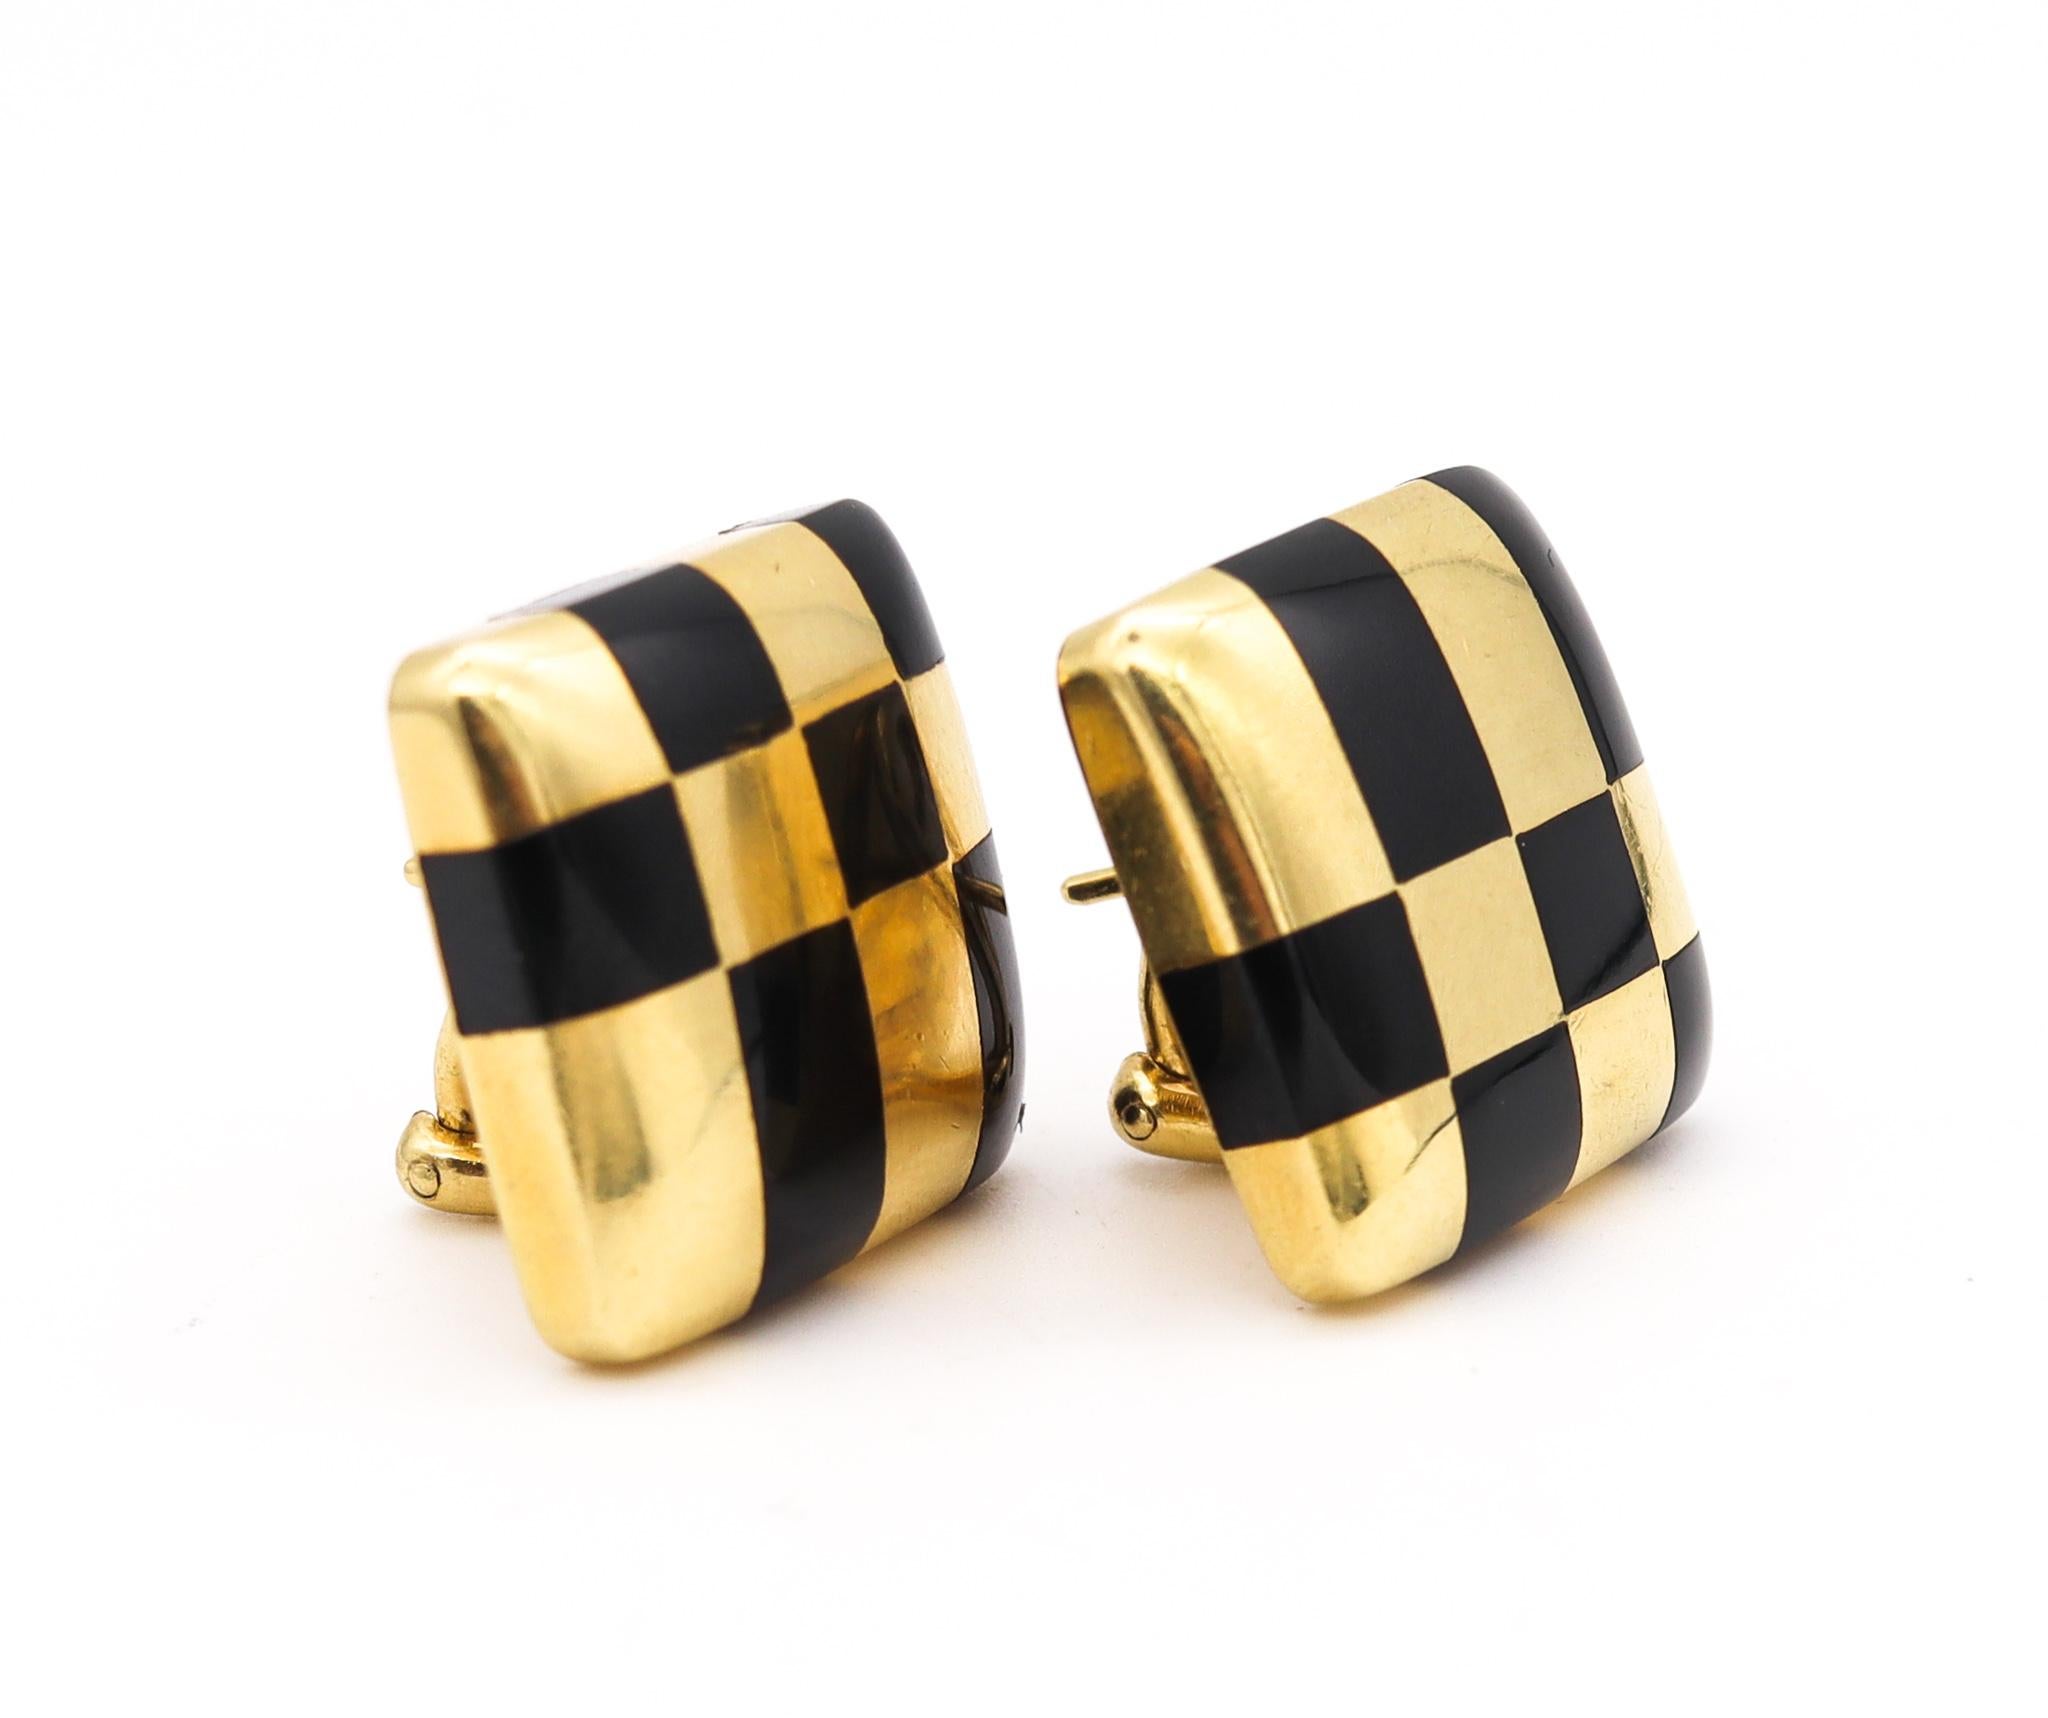 Tiffany Co 1982 Angela Cummings Black Jade Checkerboard Earrings In 18Kt Gold In Excellent Condition For Sale In Miami, FL